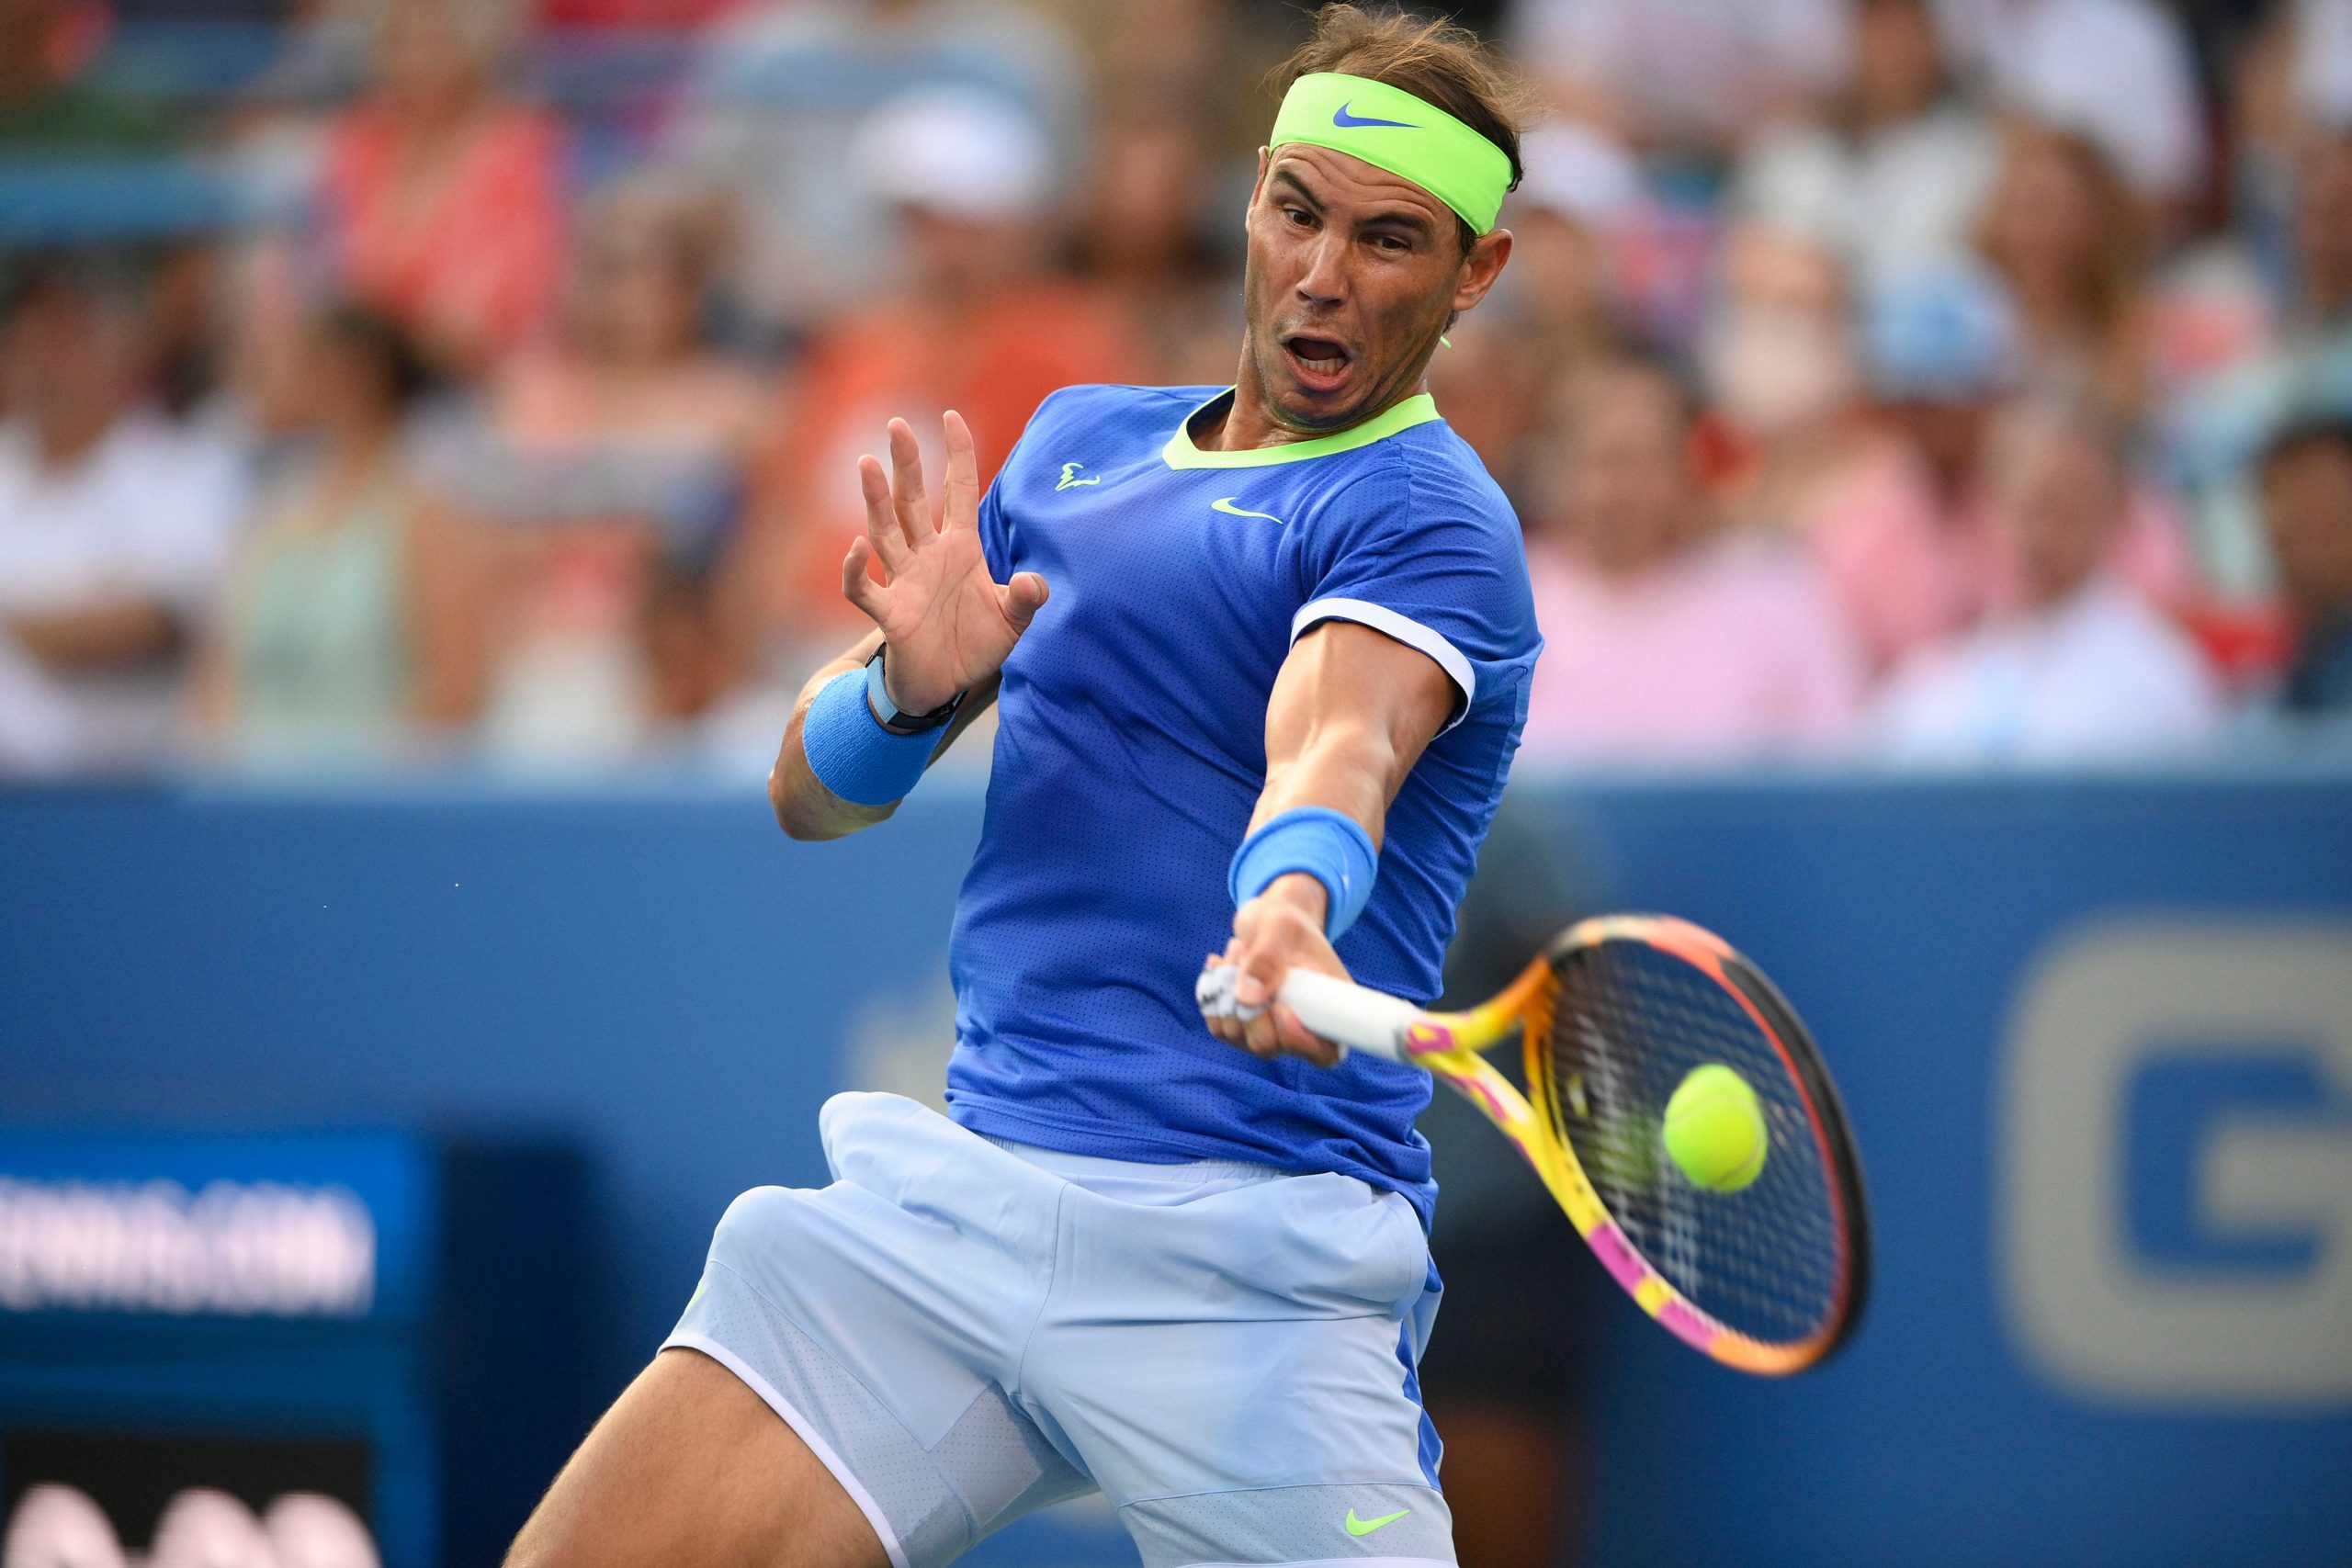 Rafael Nadal pulls out of US Open, ends season to heal injured foot